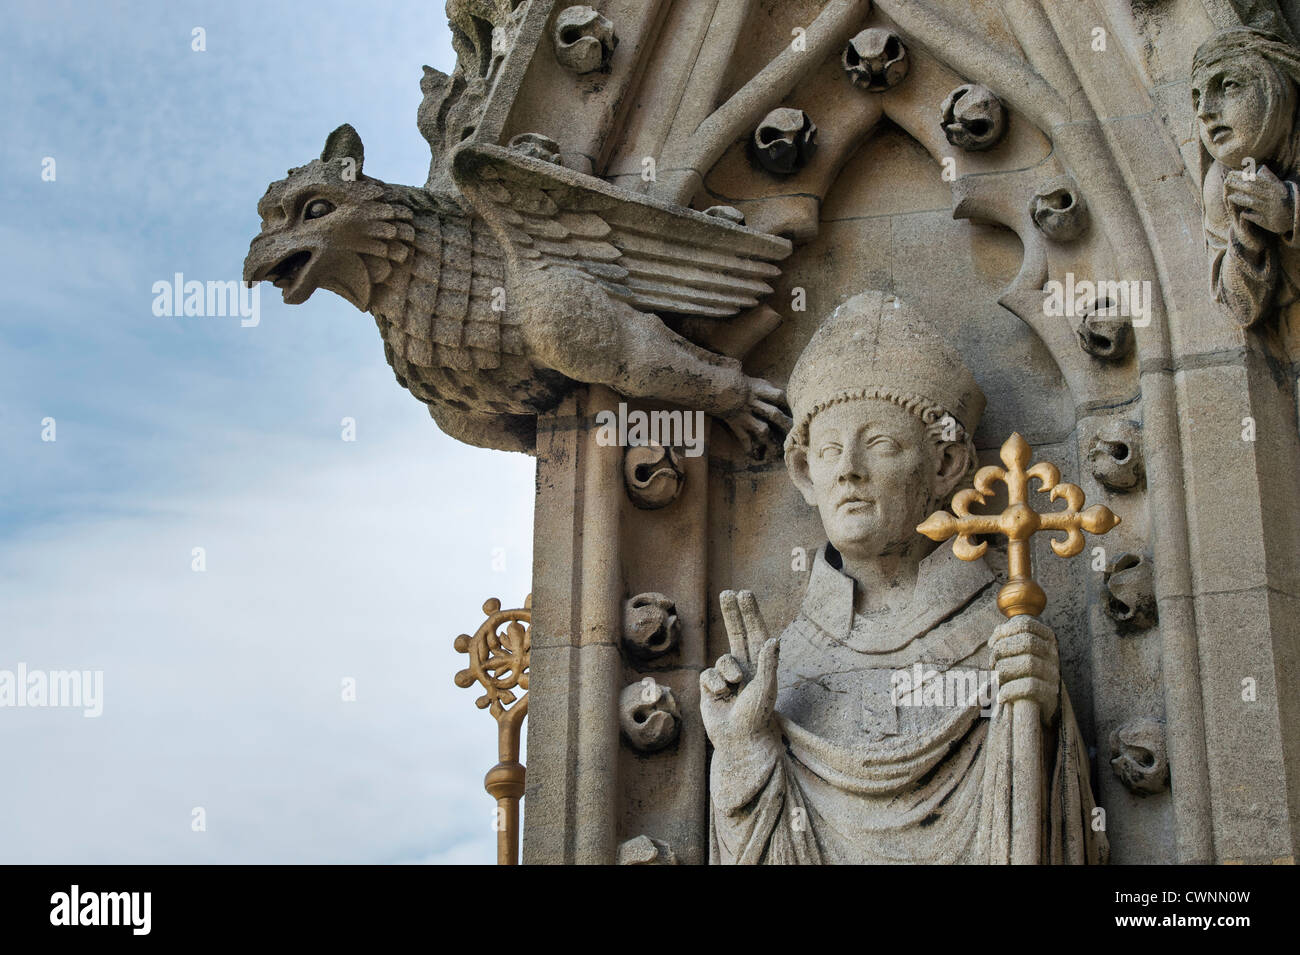 Carved stone gargoyle and Christian bishop figure on the tower of the University Church of St Mary the Virgin, Oxford, England Stock Photo